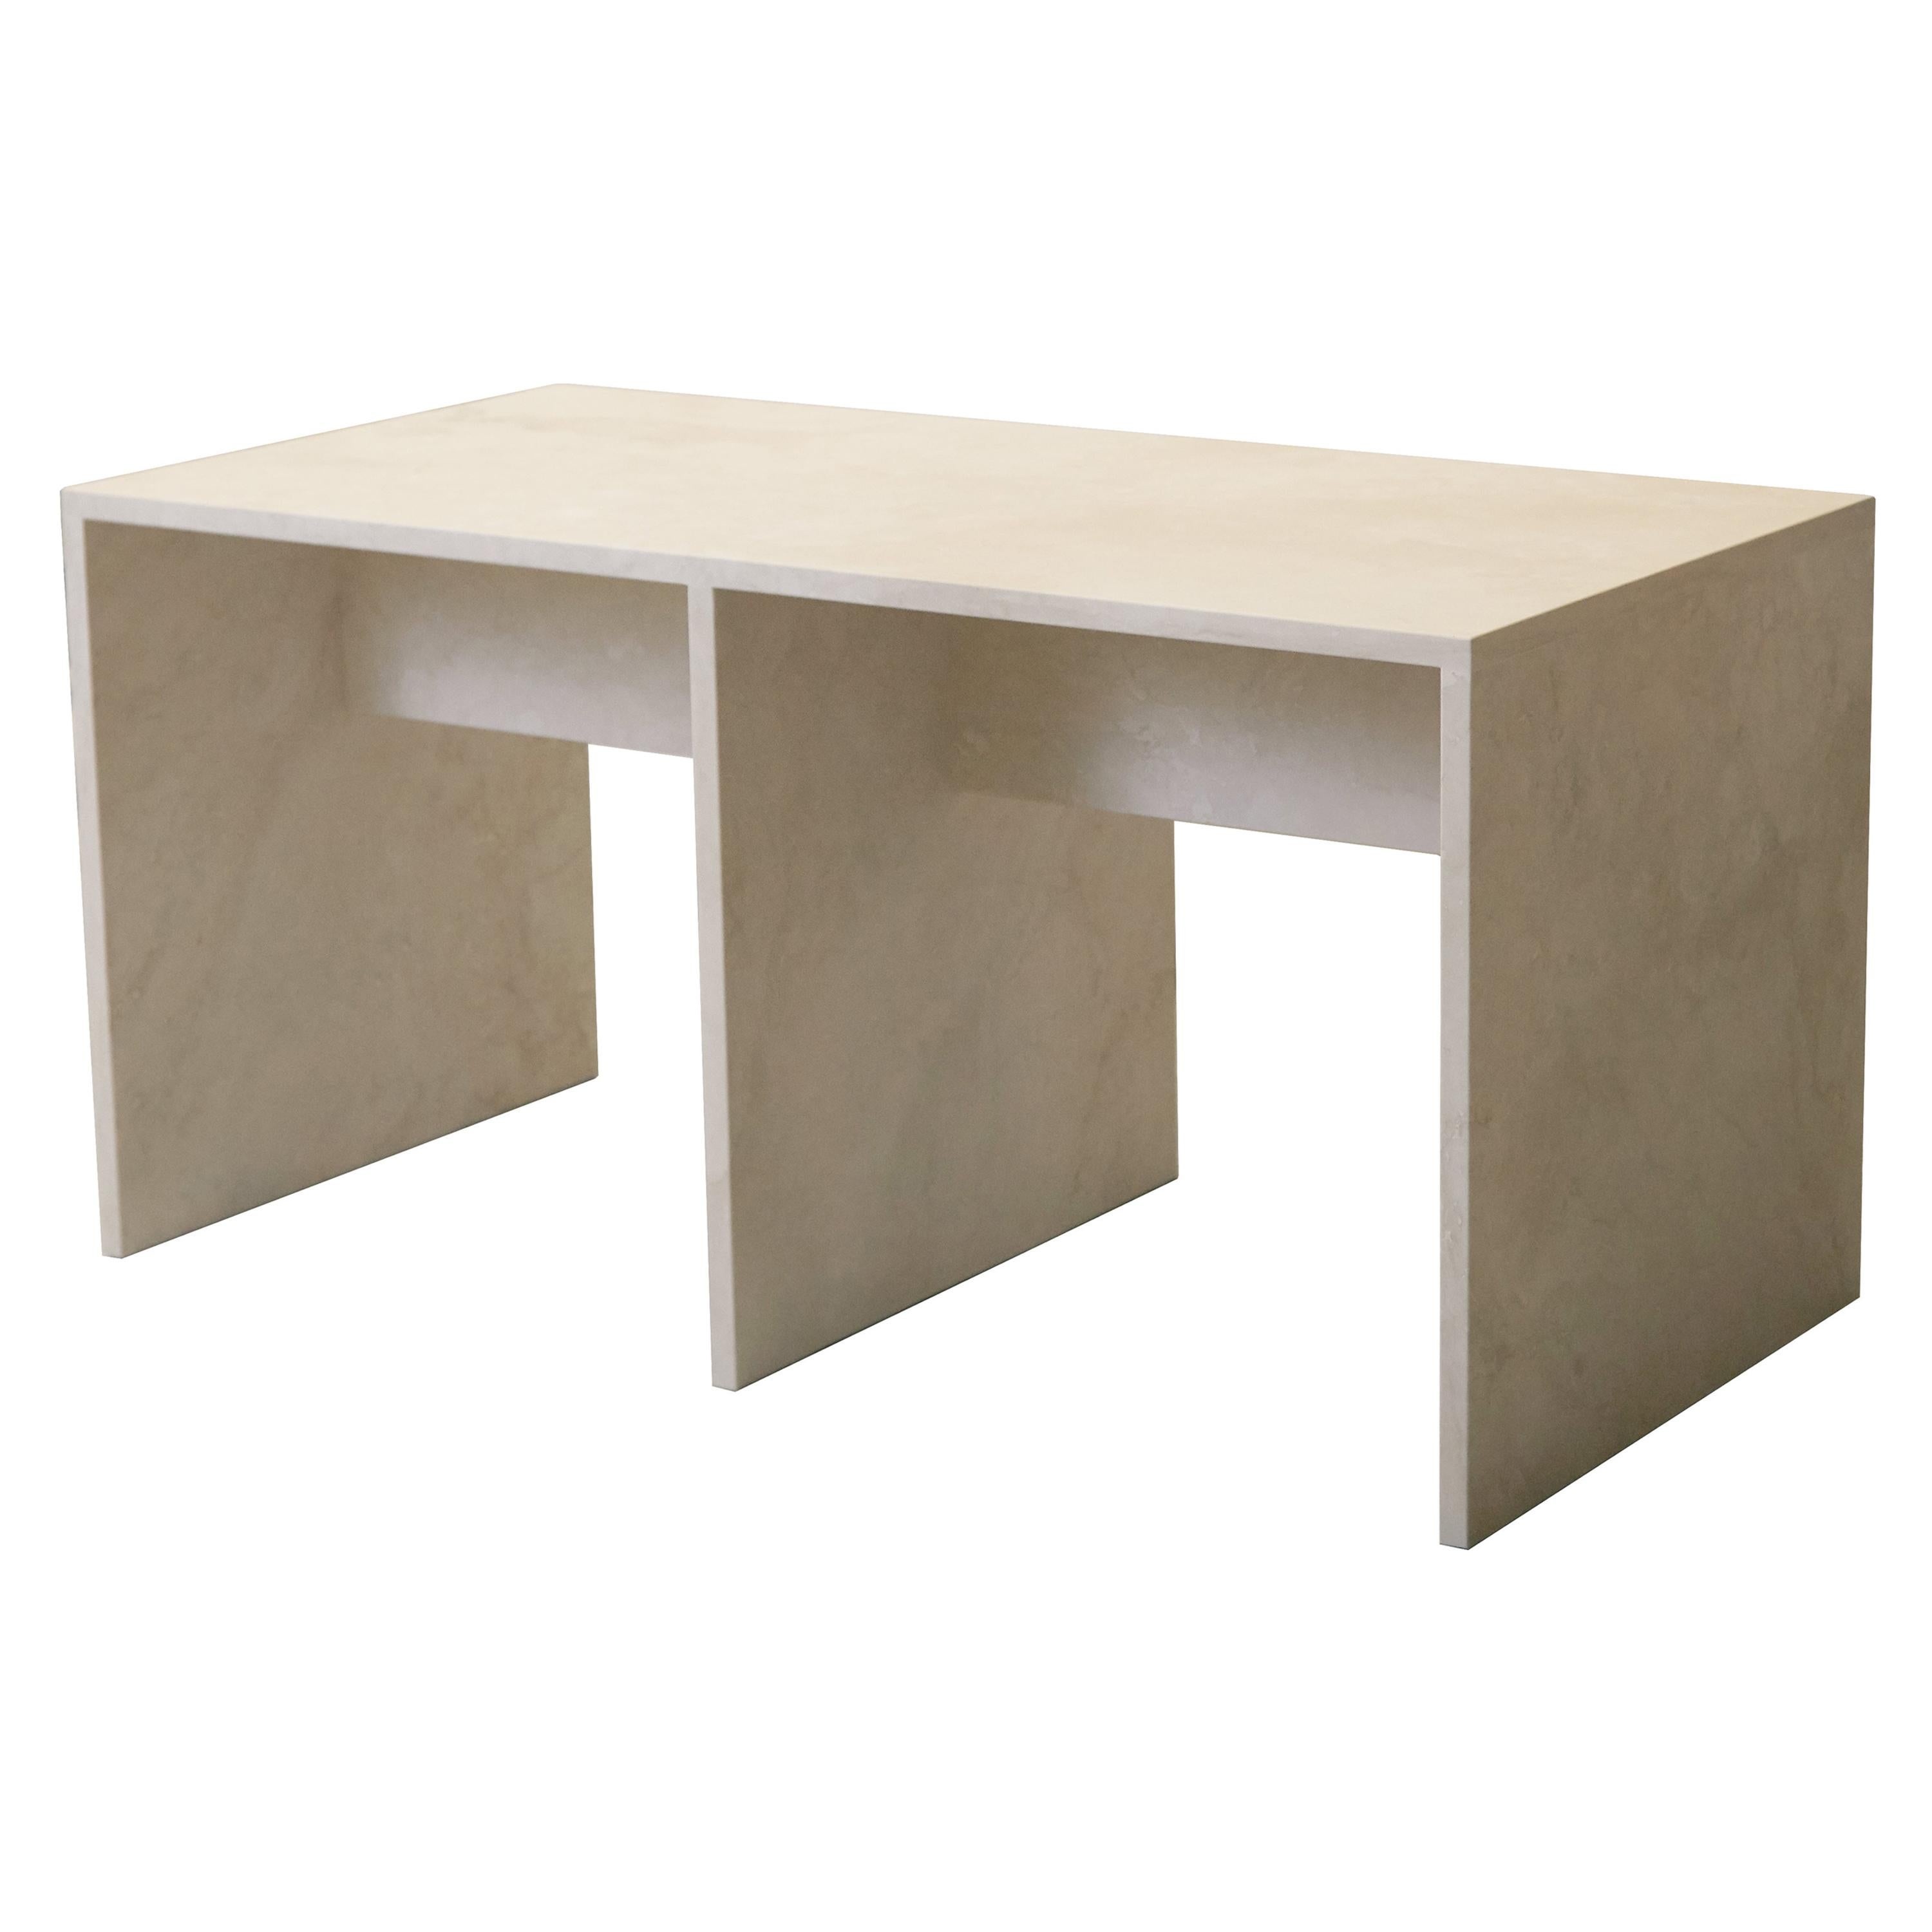 Nº113 Travertine console table or desk by Amee Allsop